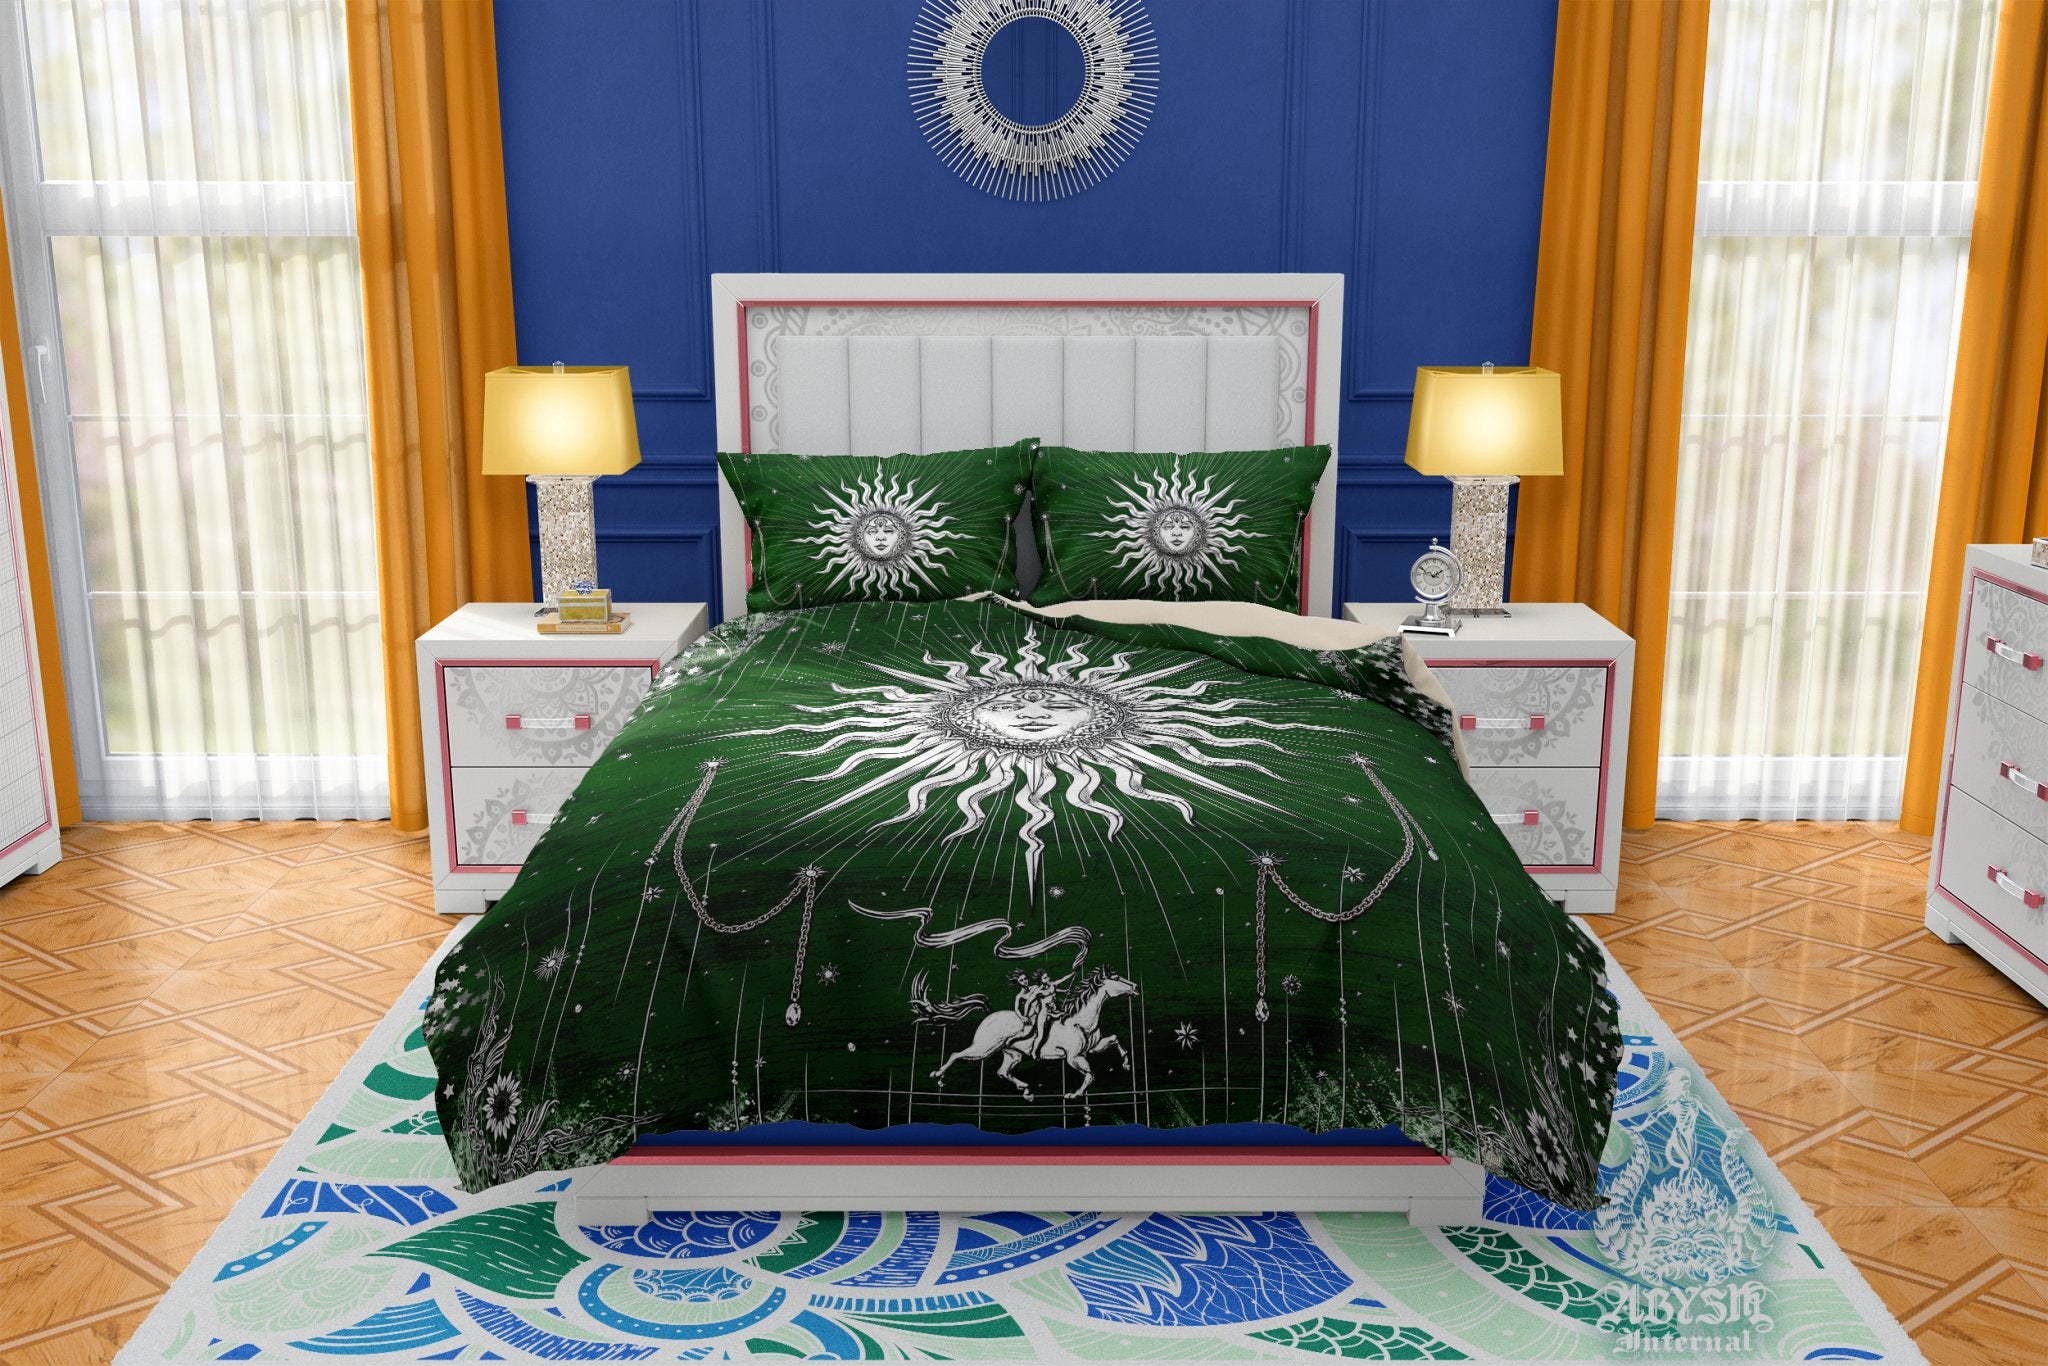 Sun Duvet Cover, Bed Covering, Boho Comforter, Indie Bedroom Decor King, Queen & Twin Bedding Set - Esoteric Tarot Arcana Art, Paper White and 6 Colors - Abysm Internal